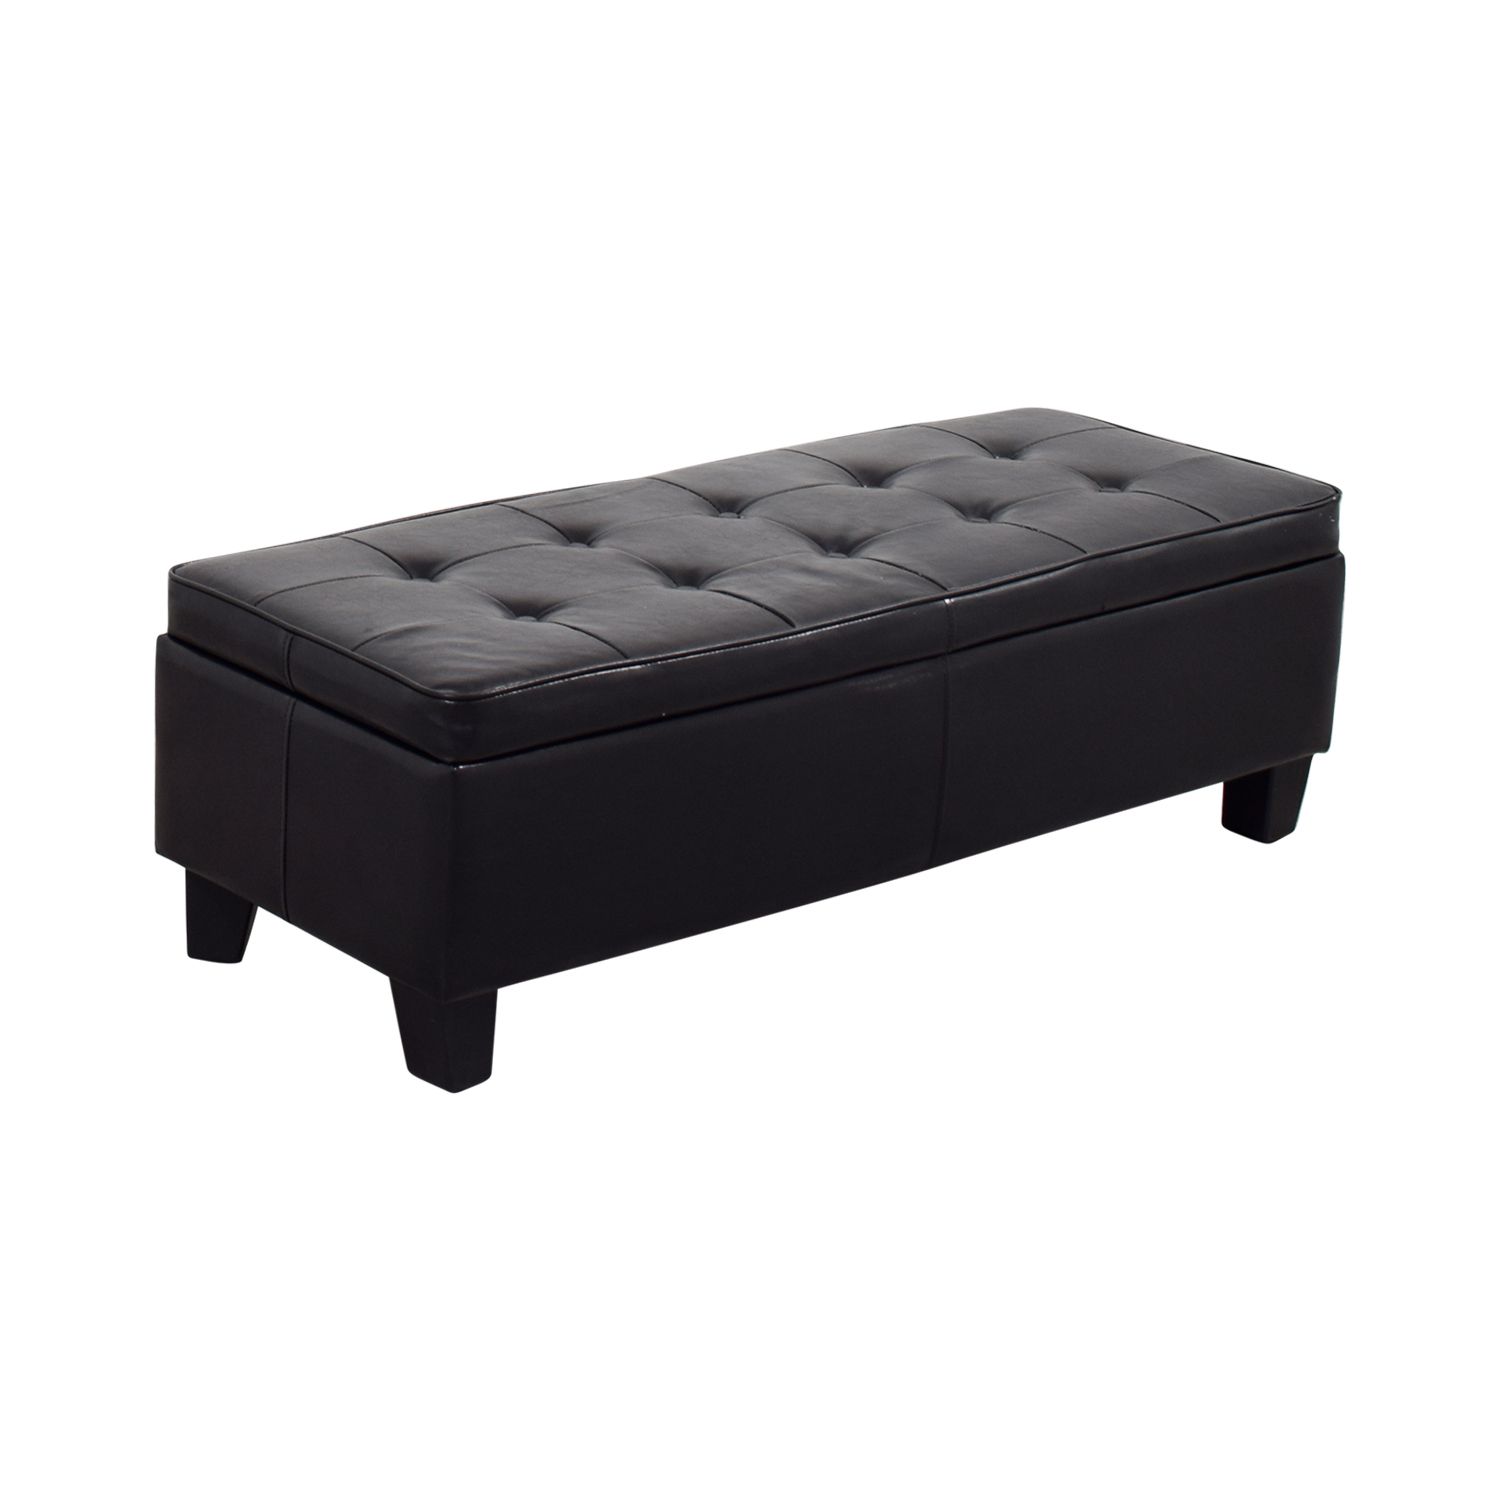 42% Off – Black Tufted Faux Leather Ottoman With Storage / Storage Pertaining To Black Faux Leather Storage Ottomans (View 18 of 20)